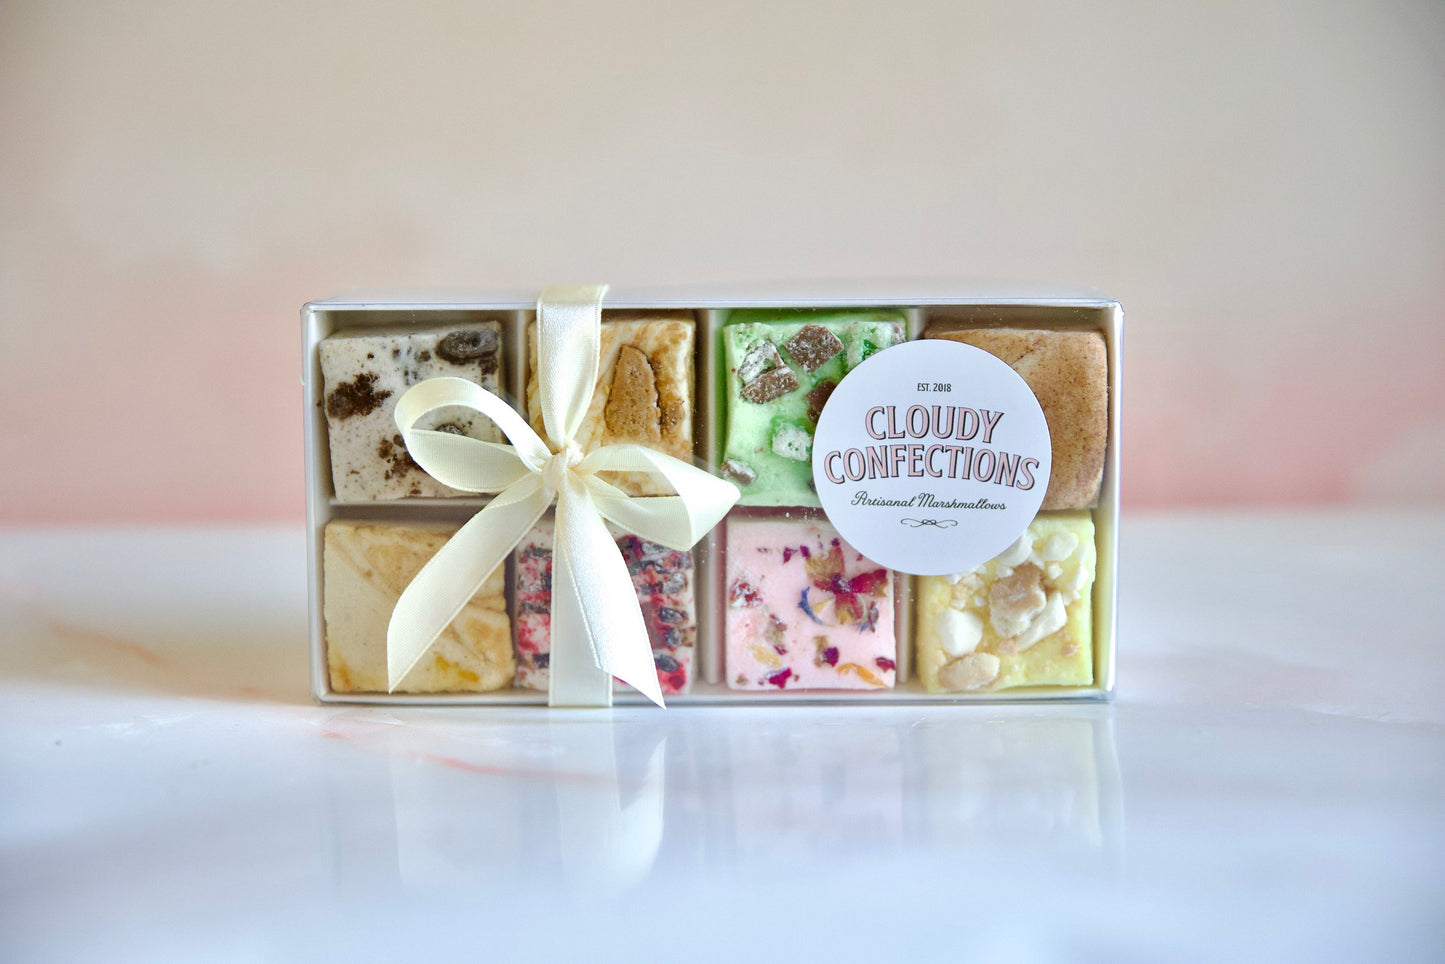 Cloudy Confections - Signature Mixed Box of 8 Marshmallows